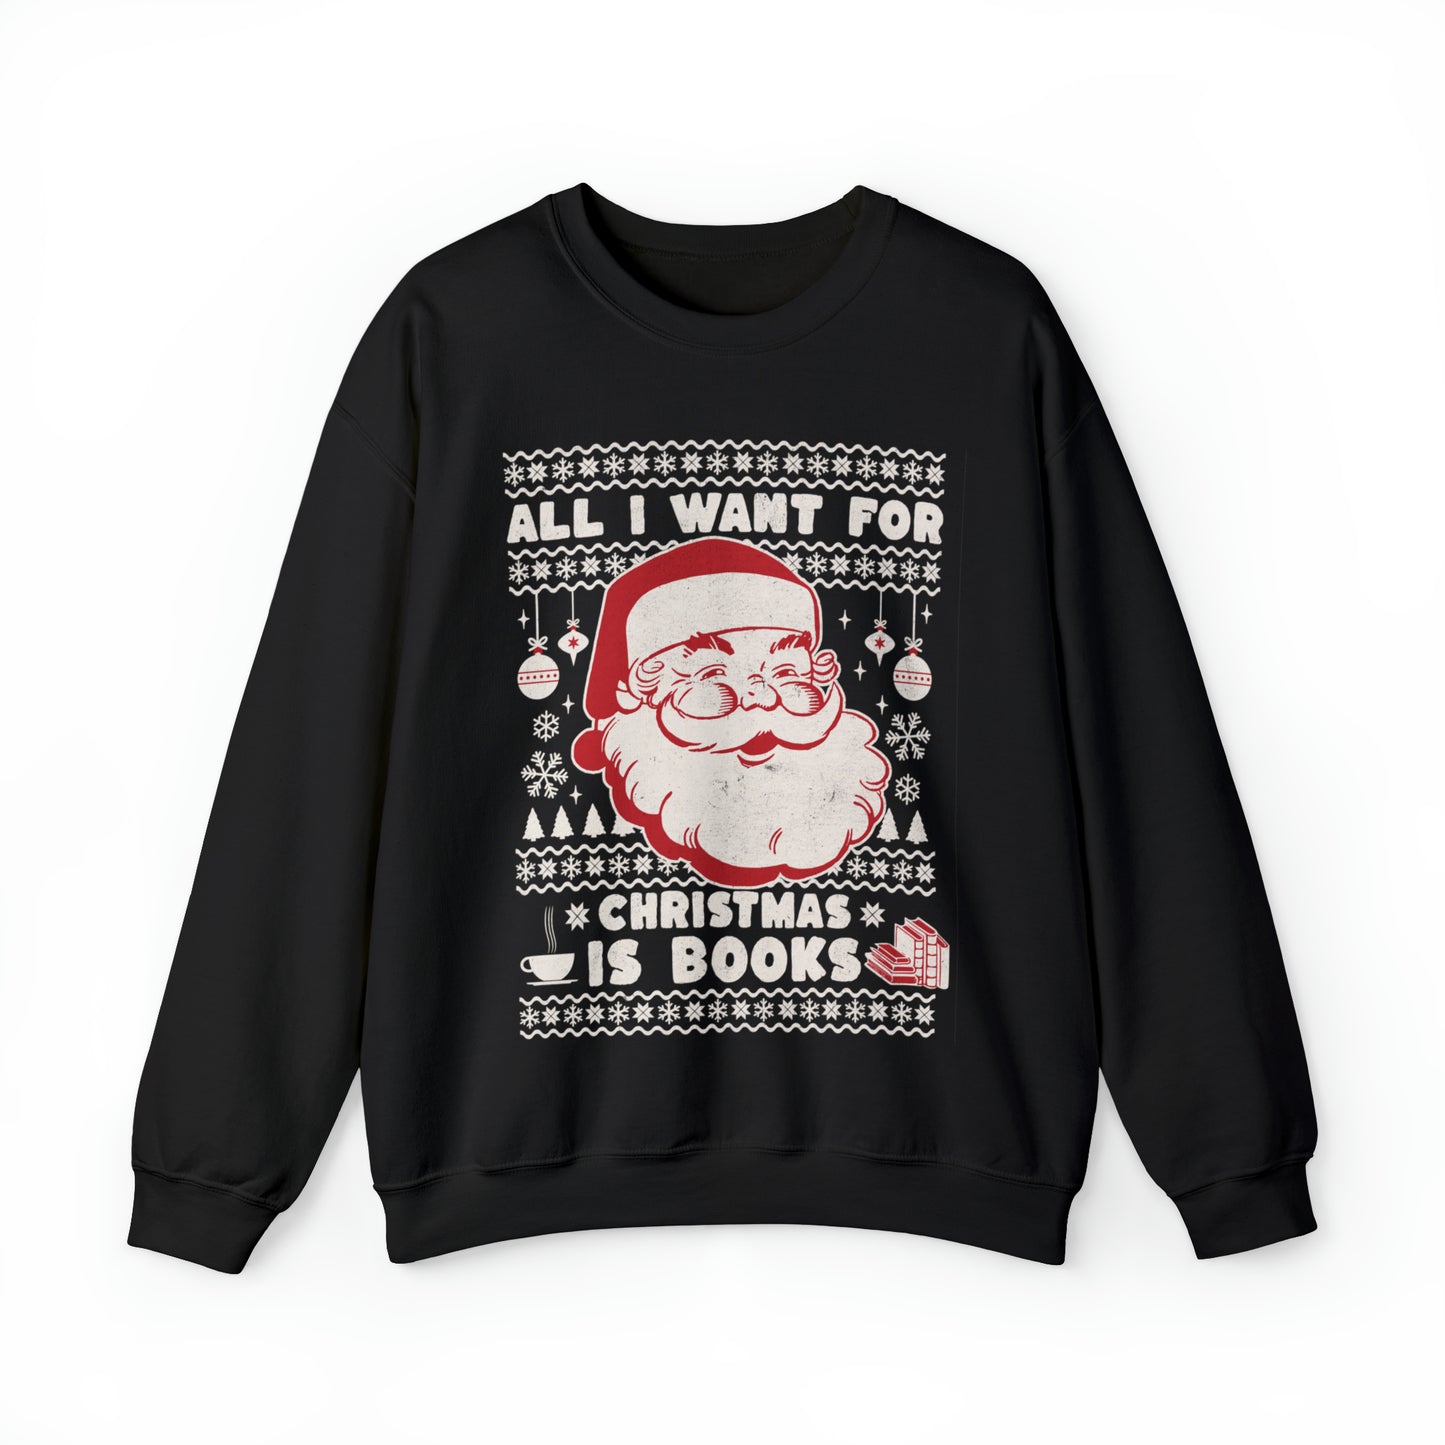 All I Want For Christmas is Books Unisex Sweatshirt - Ugly Christmas Sweater